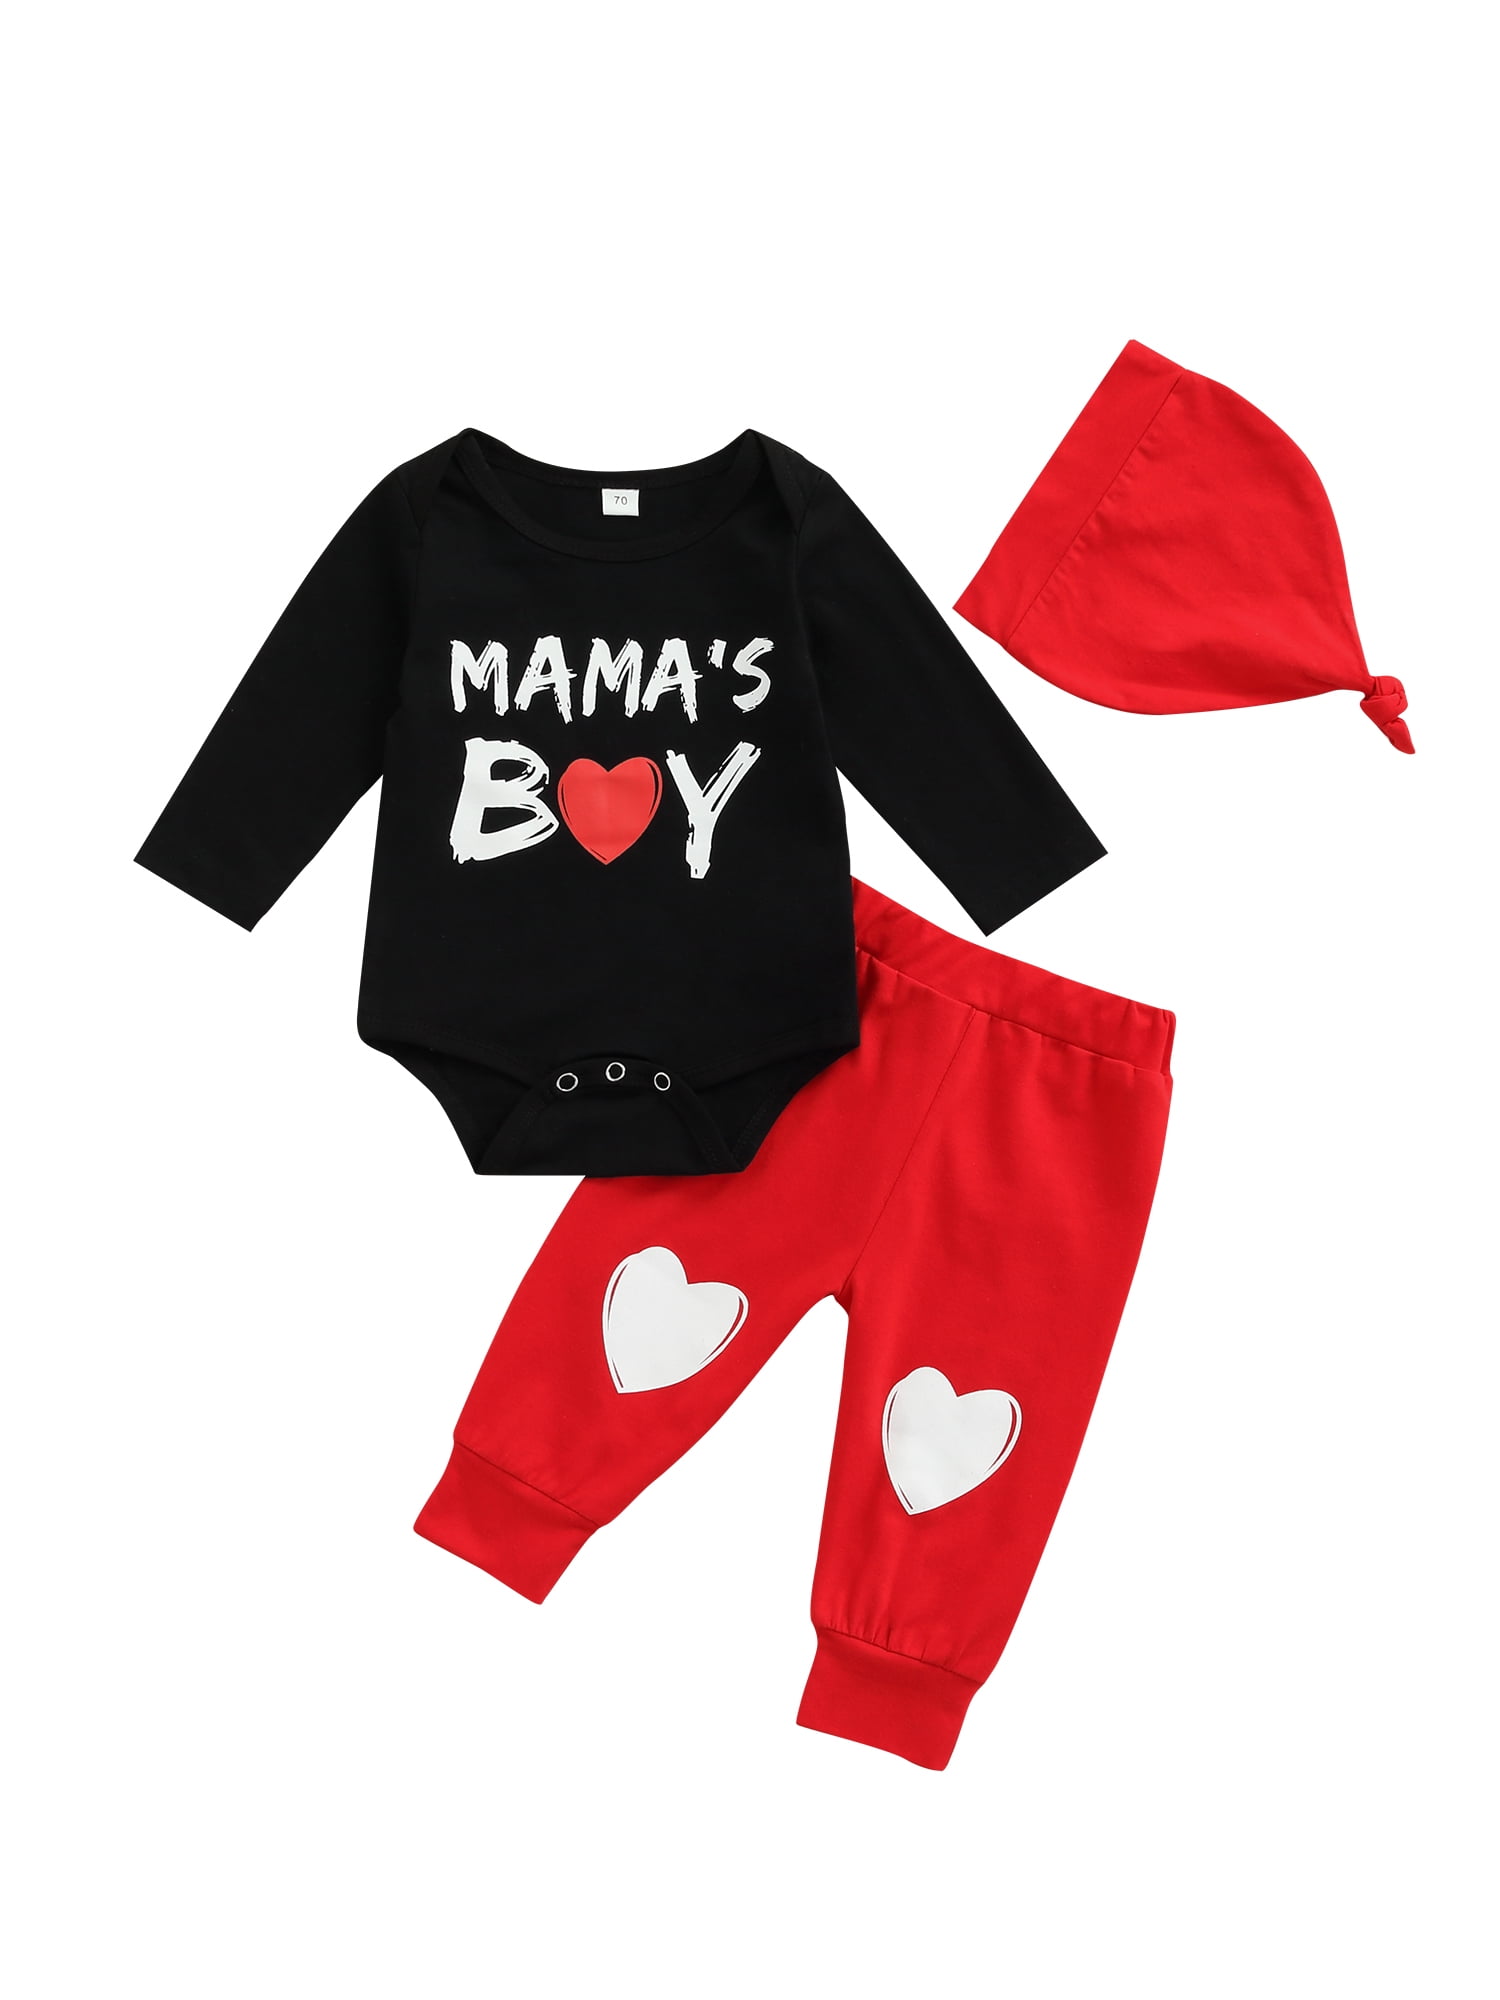 Valentines Day Hearts Unisex Baby 4 Piece Outfit 4 Newborn and Preemie Sizes 